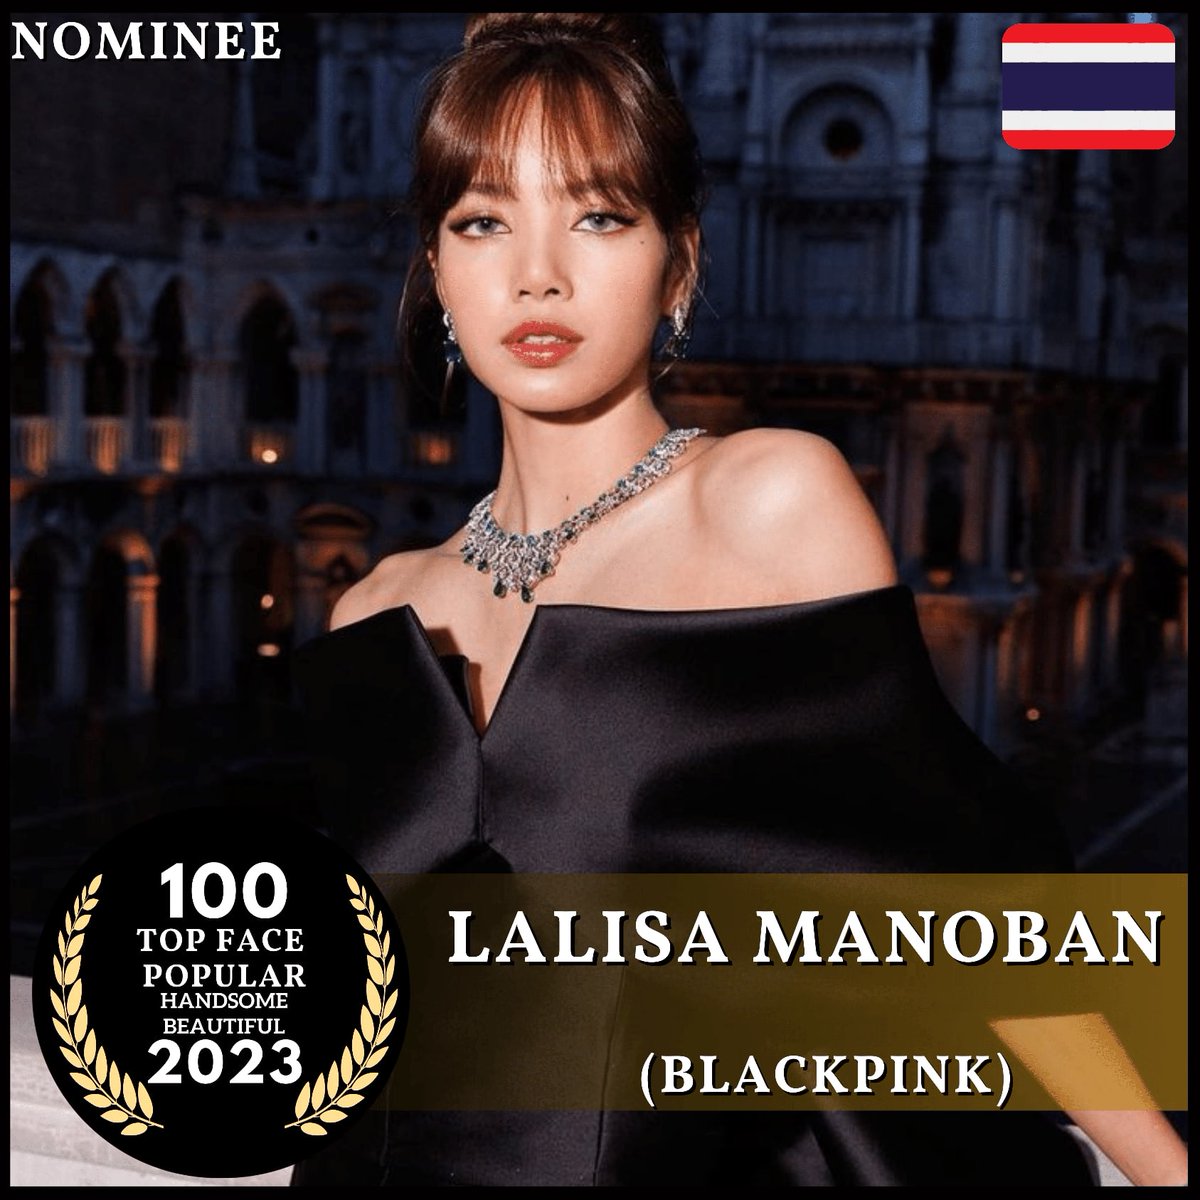 VOTE 100 TOP FACE HANDSOME BEAUTIFUL 2023 NOMINEE @Lsglobal_ (THAILAND) VOTE BY COMMENT, LIKE AND SHARE WITH HASTAG #100topfacehandsomebeautiful2023 1 LIKE 5 VOTES 1 COMMENT 3 VOTES 1 SHARE 10 VOTES #LALISA #LISA #BLACKPINK #blink #BLACKPINK_WORLDTOUR #BLACKPINK_BORNPINK